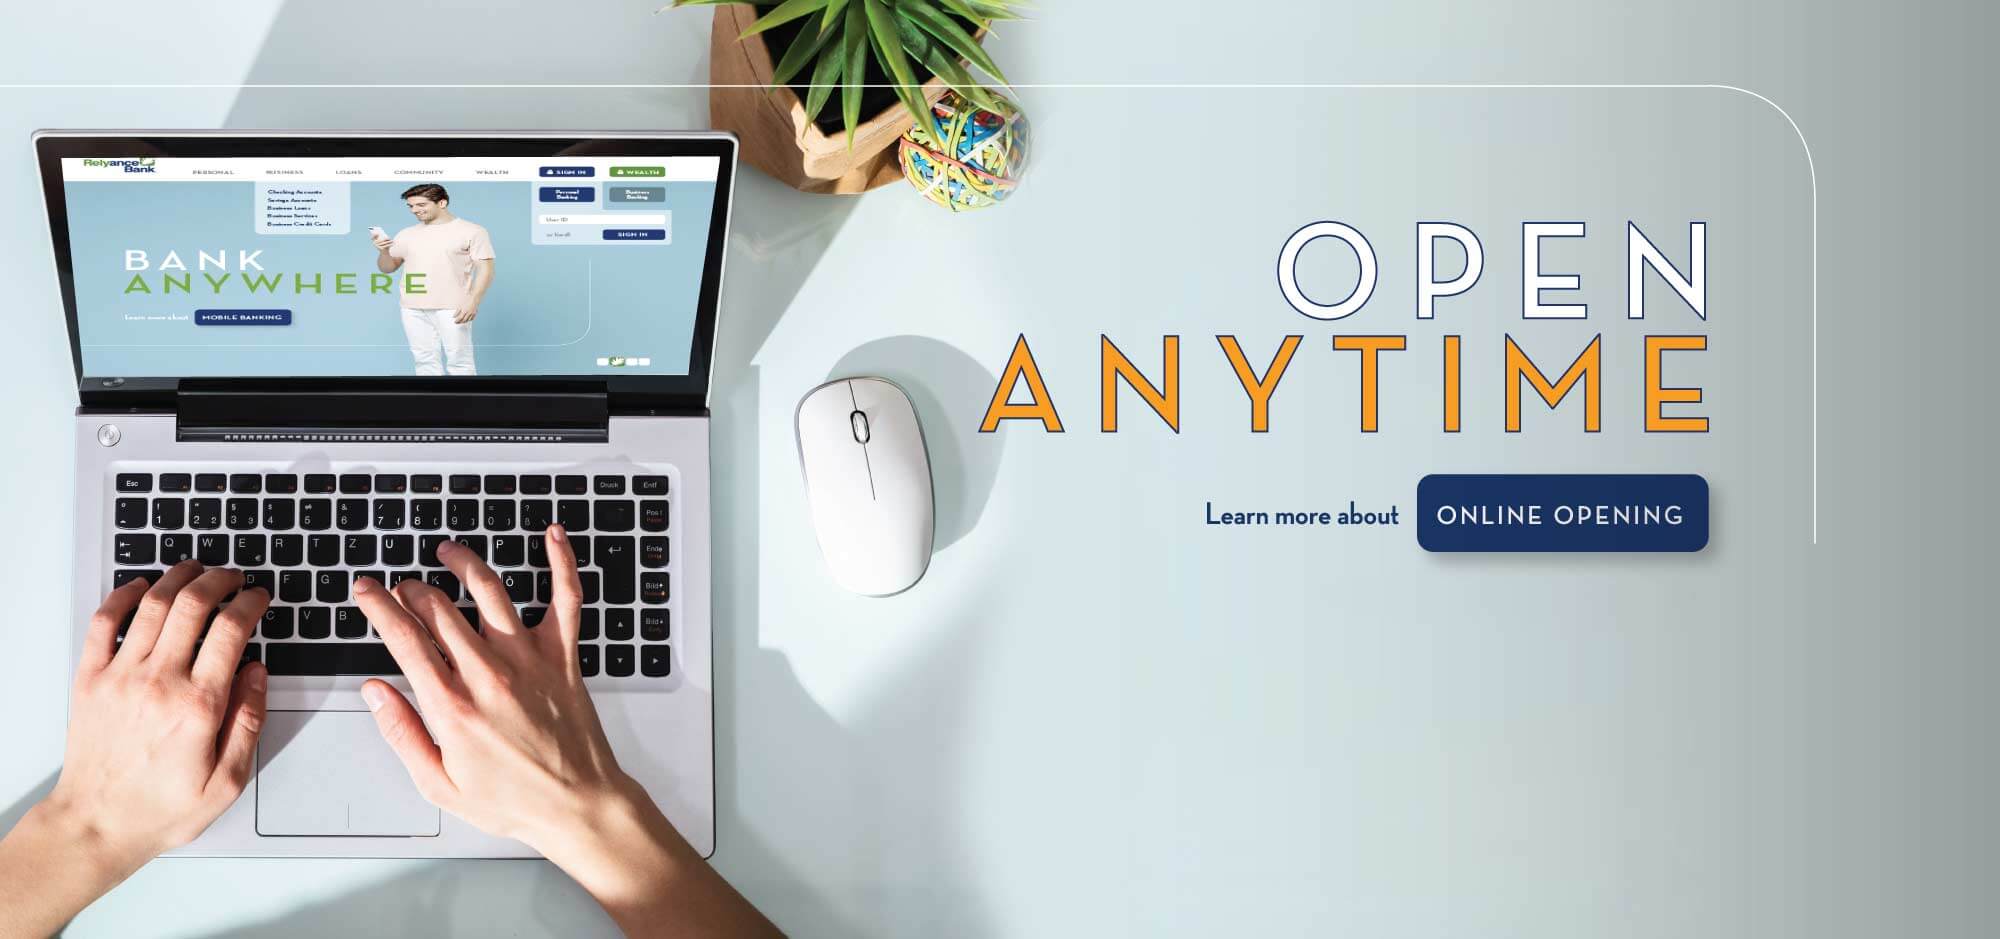 Open Anytime! Click to learn more about online account opening